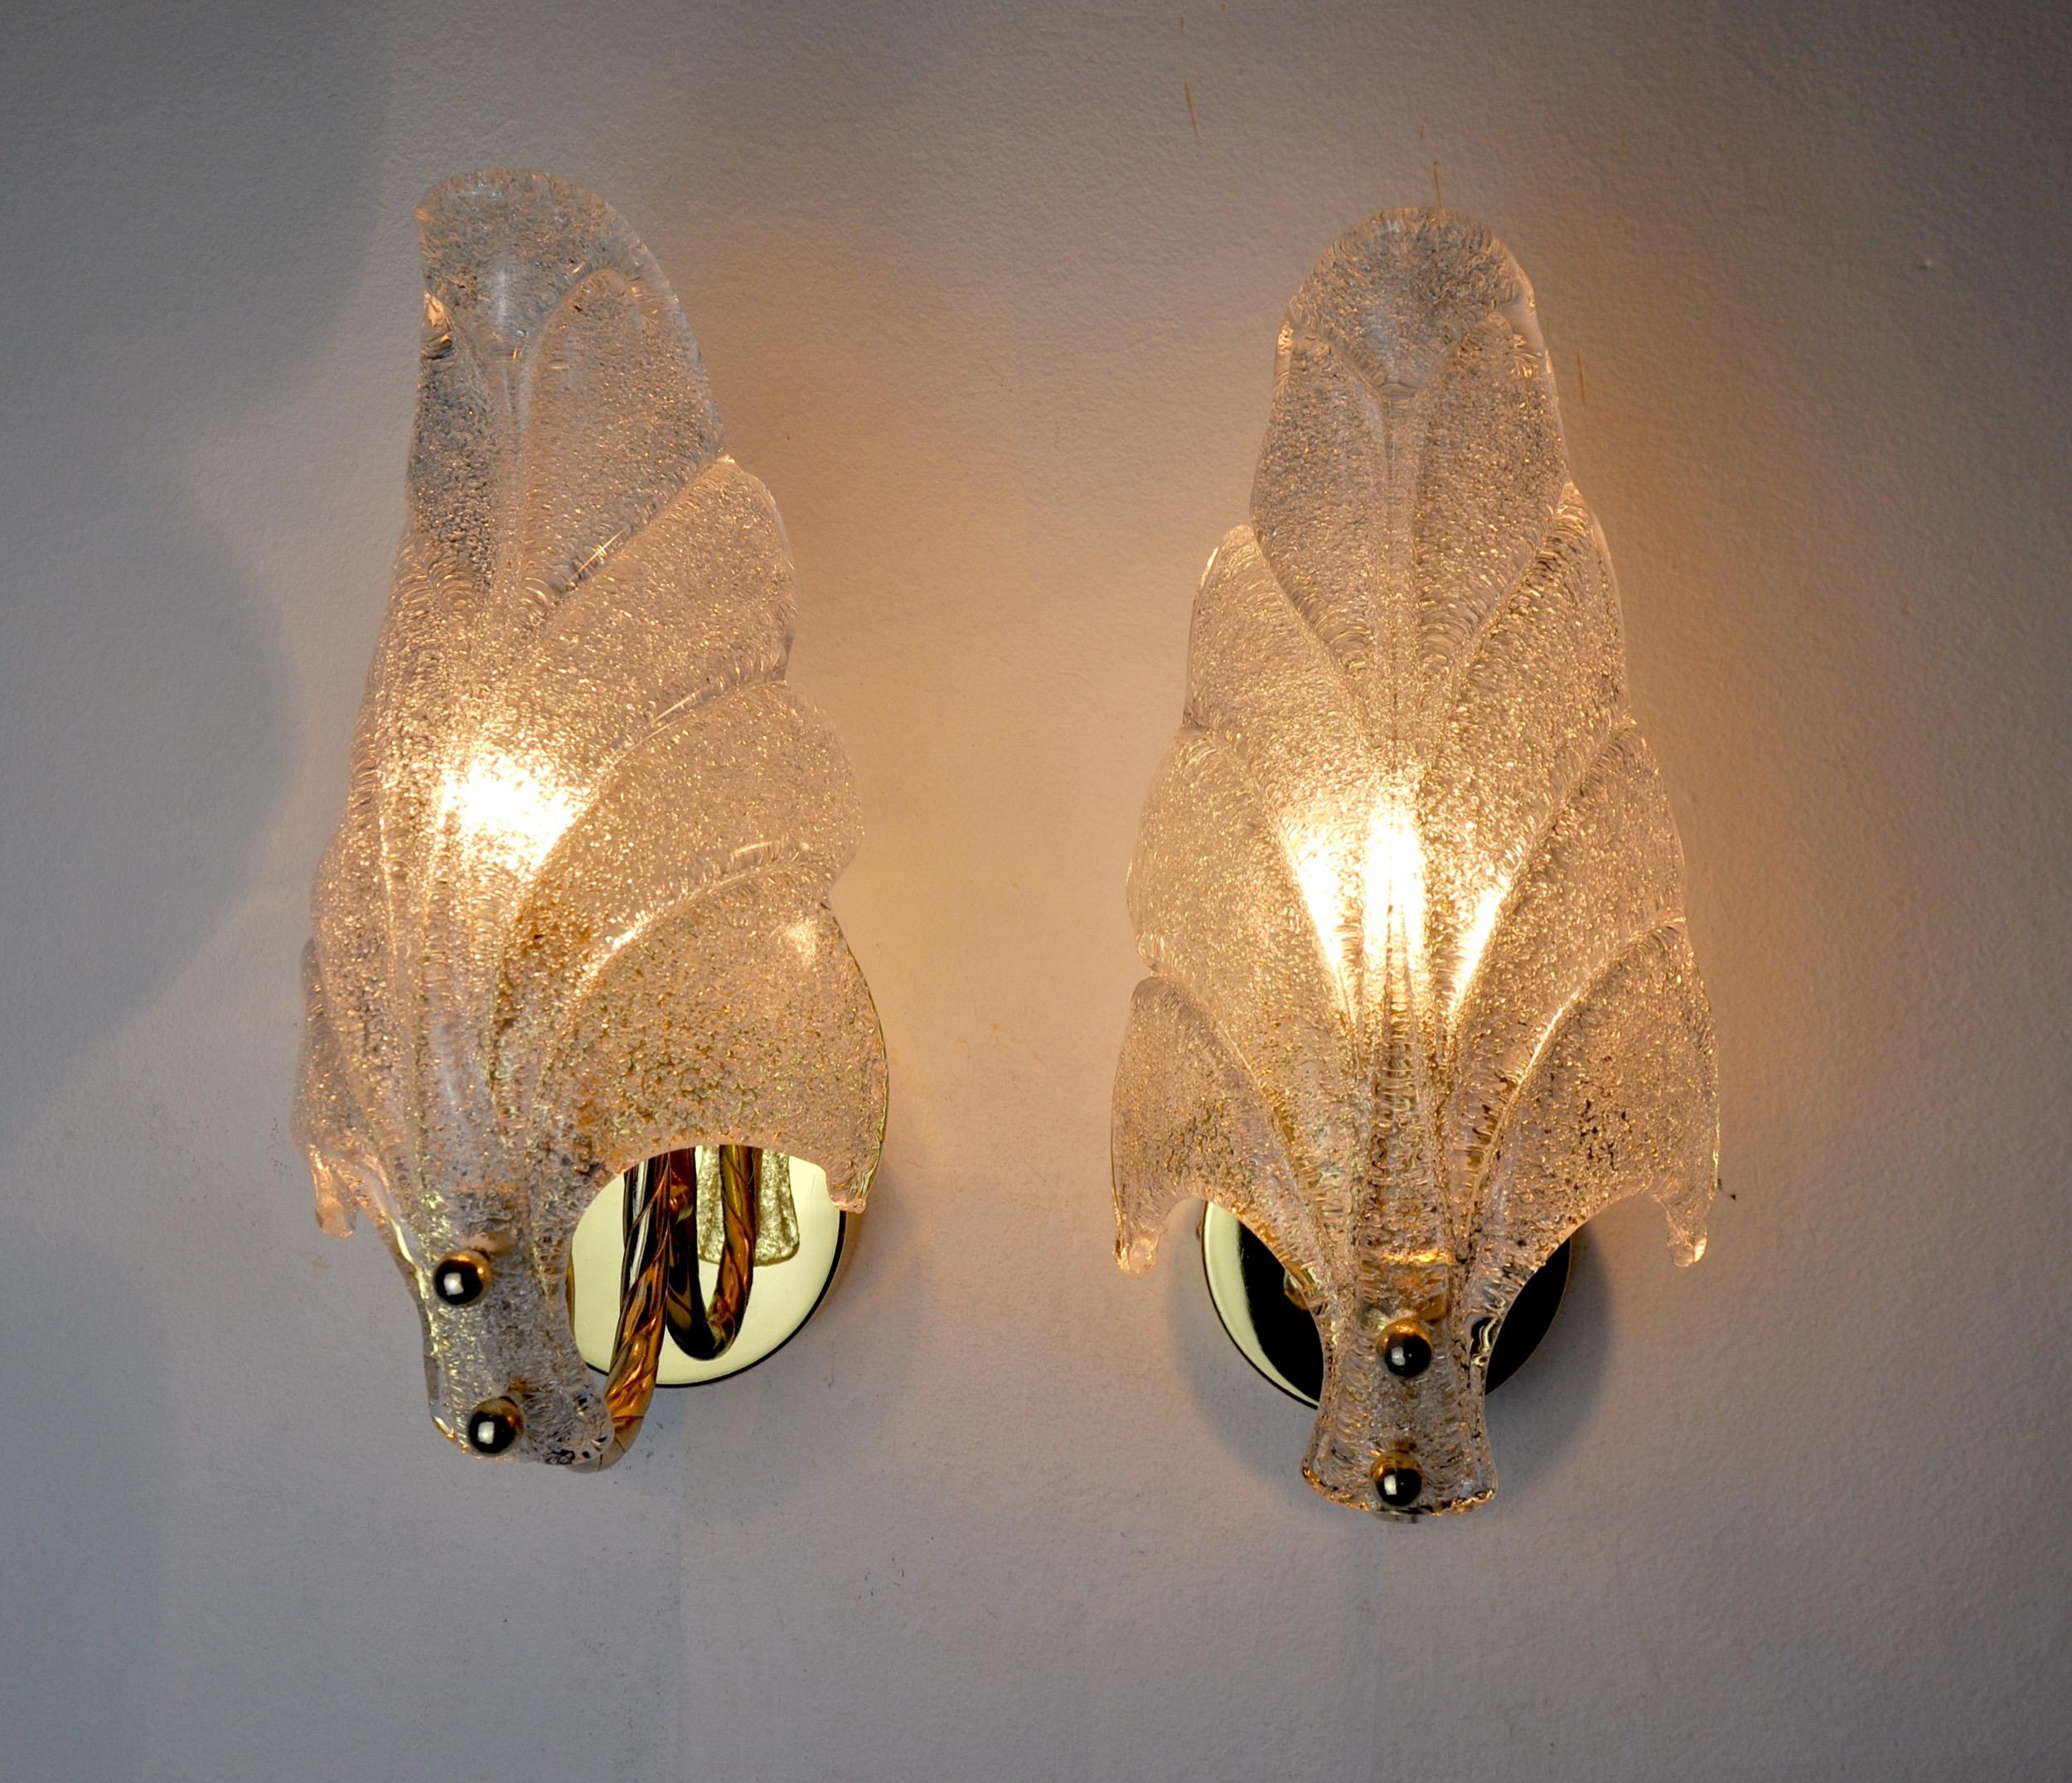 Superb pair of carl fagerlund wall lamps for lyfa dating from the 70s.

Structure in gilded metal and frosted glass in the shape of a sheet.

The diffused light is soft and harmonious perfect to illuminate your interior.

Time mark consistent